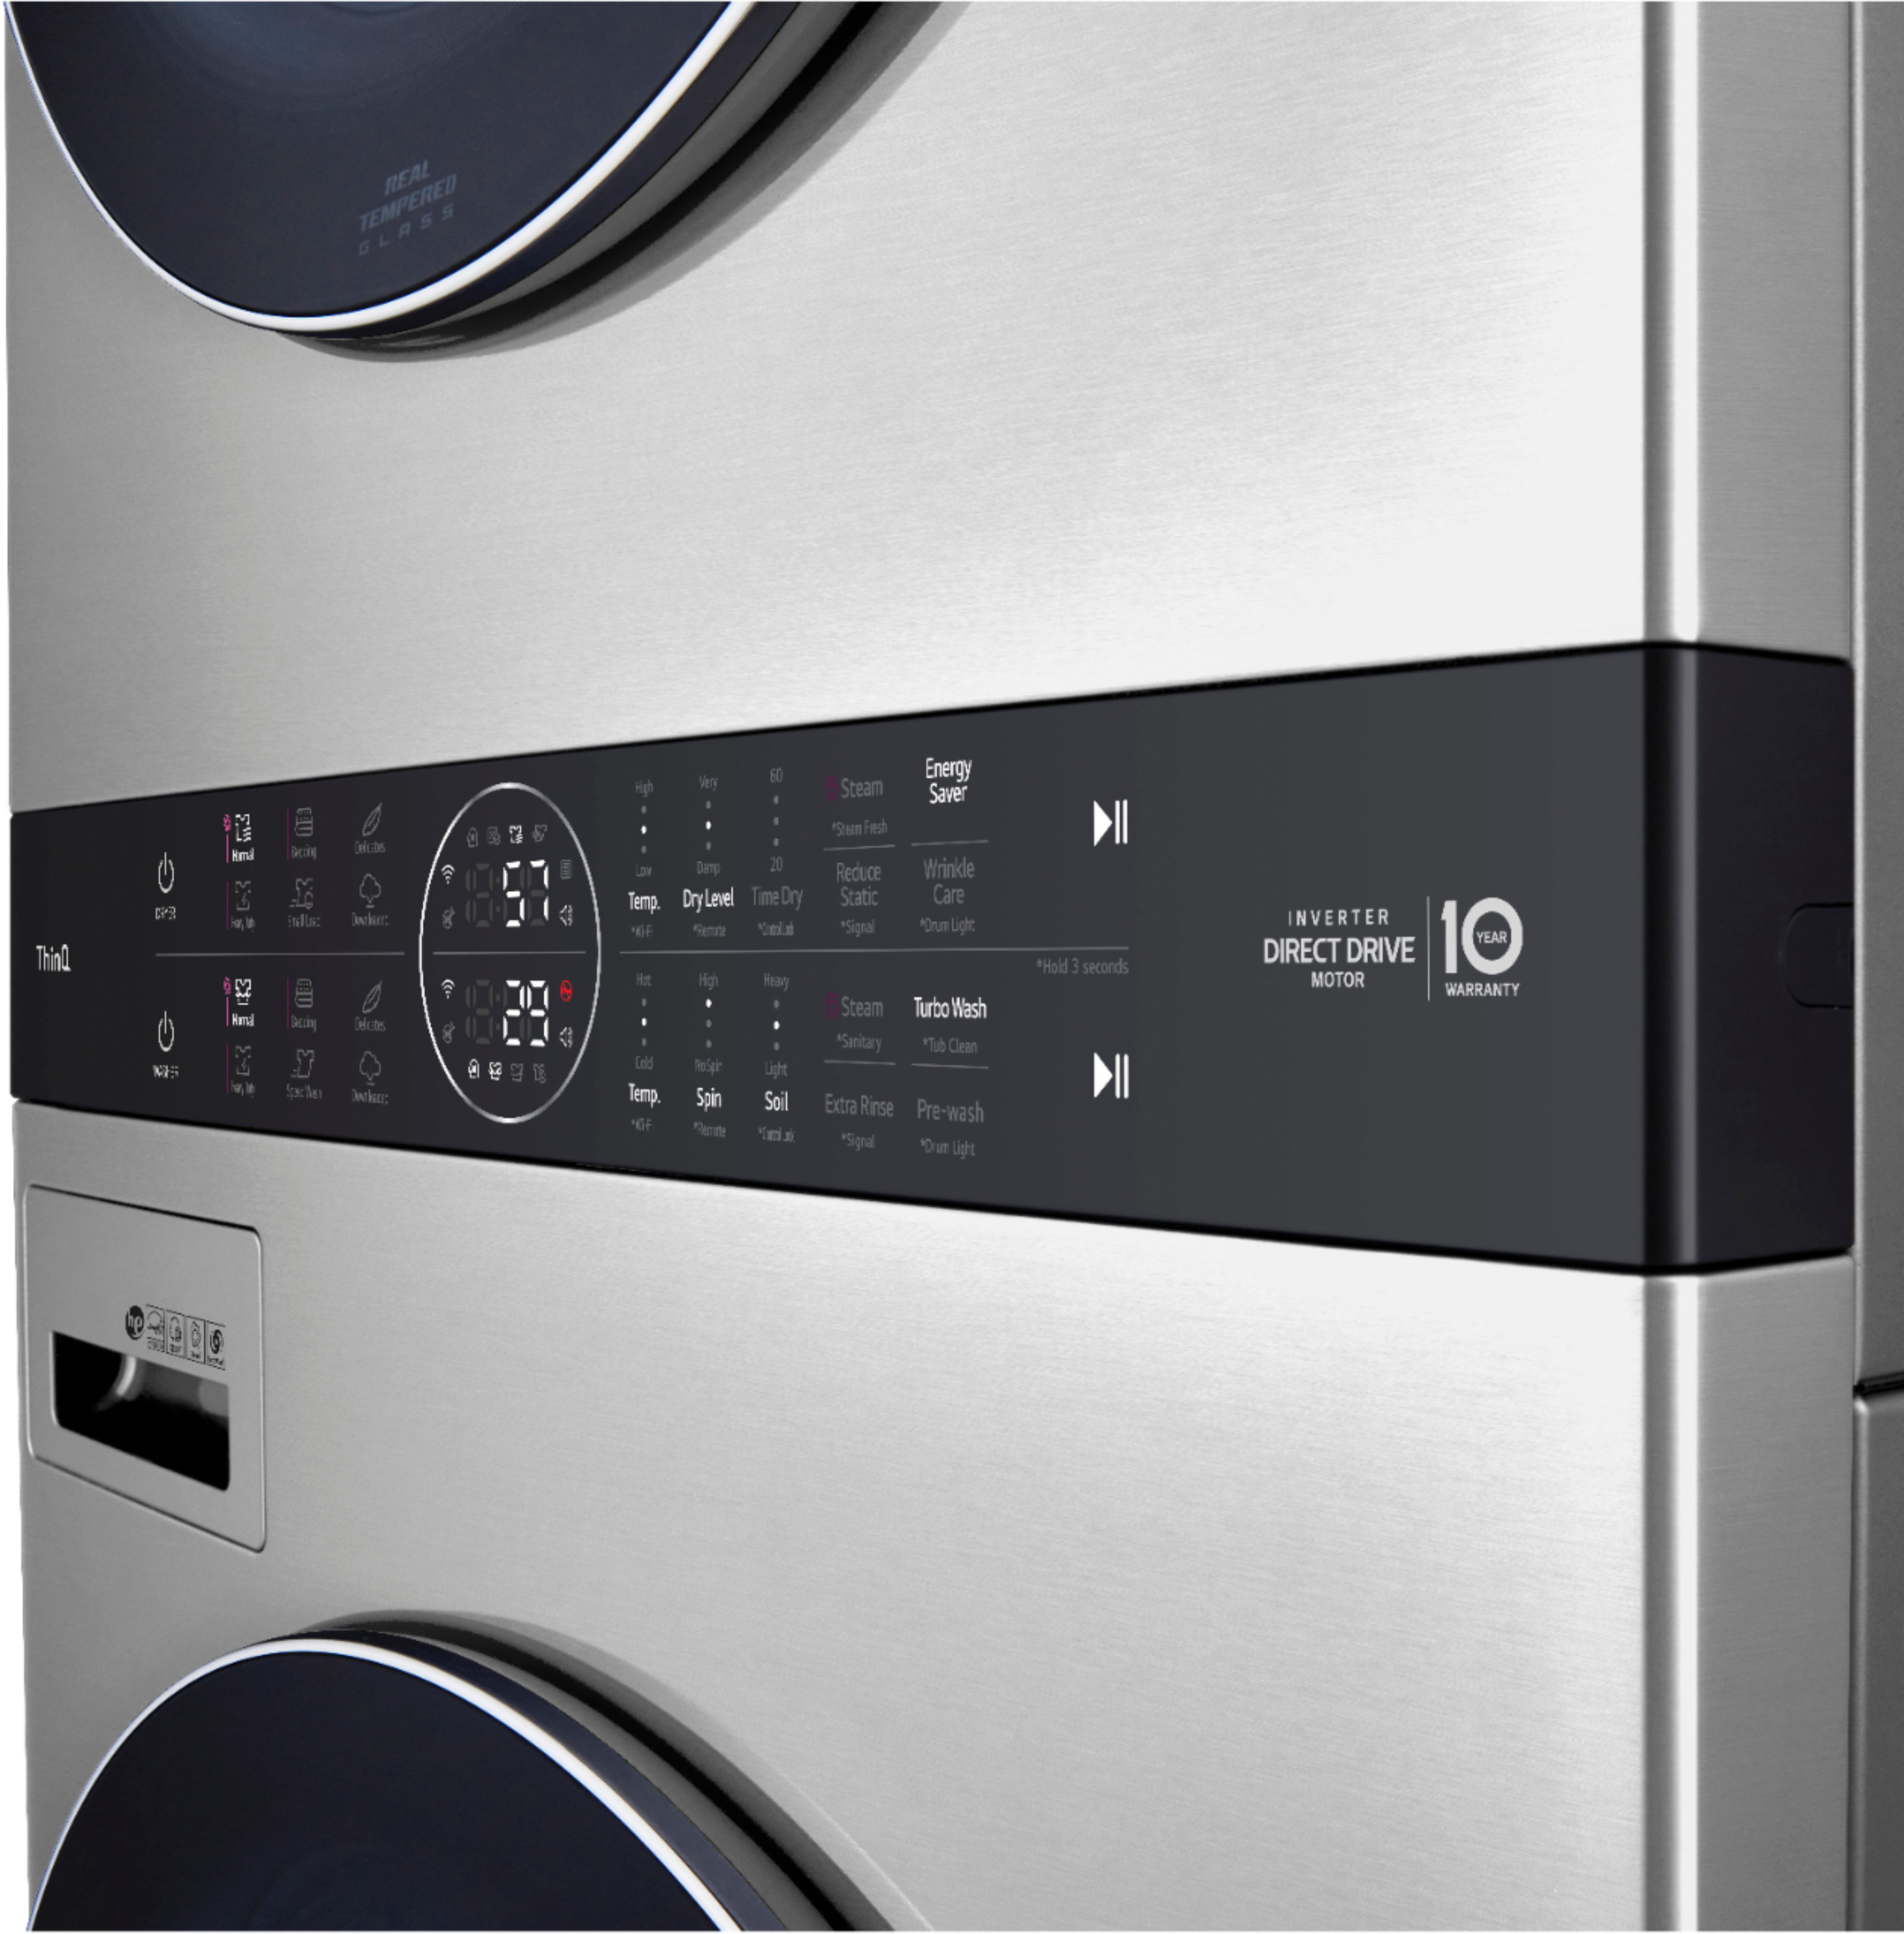 Load WSGX201HNA Gas Steam with STUDIO Washer - 5.0 and and Noble Best Cu. Cu. Ft. HE Intelligence WashTower 7.4 Front Built-In Smart Dryer LG Steel Ft. Buy